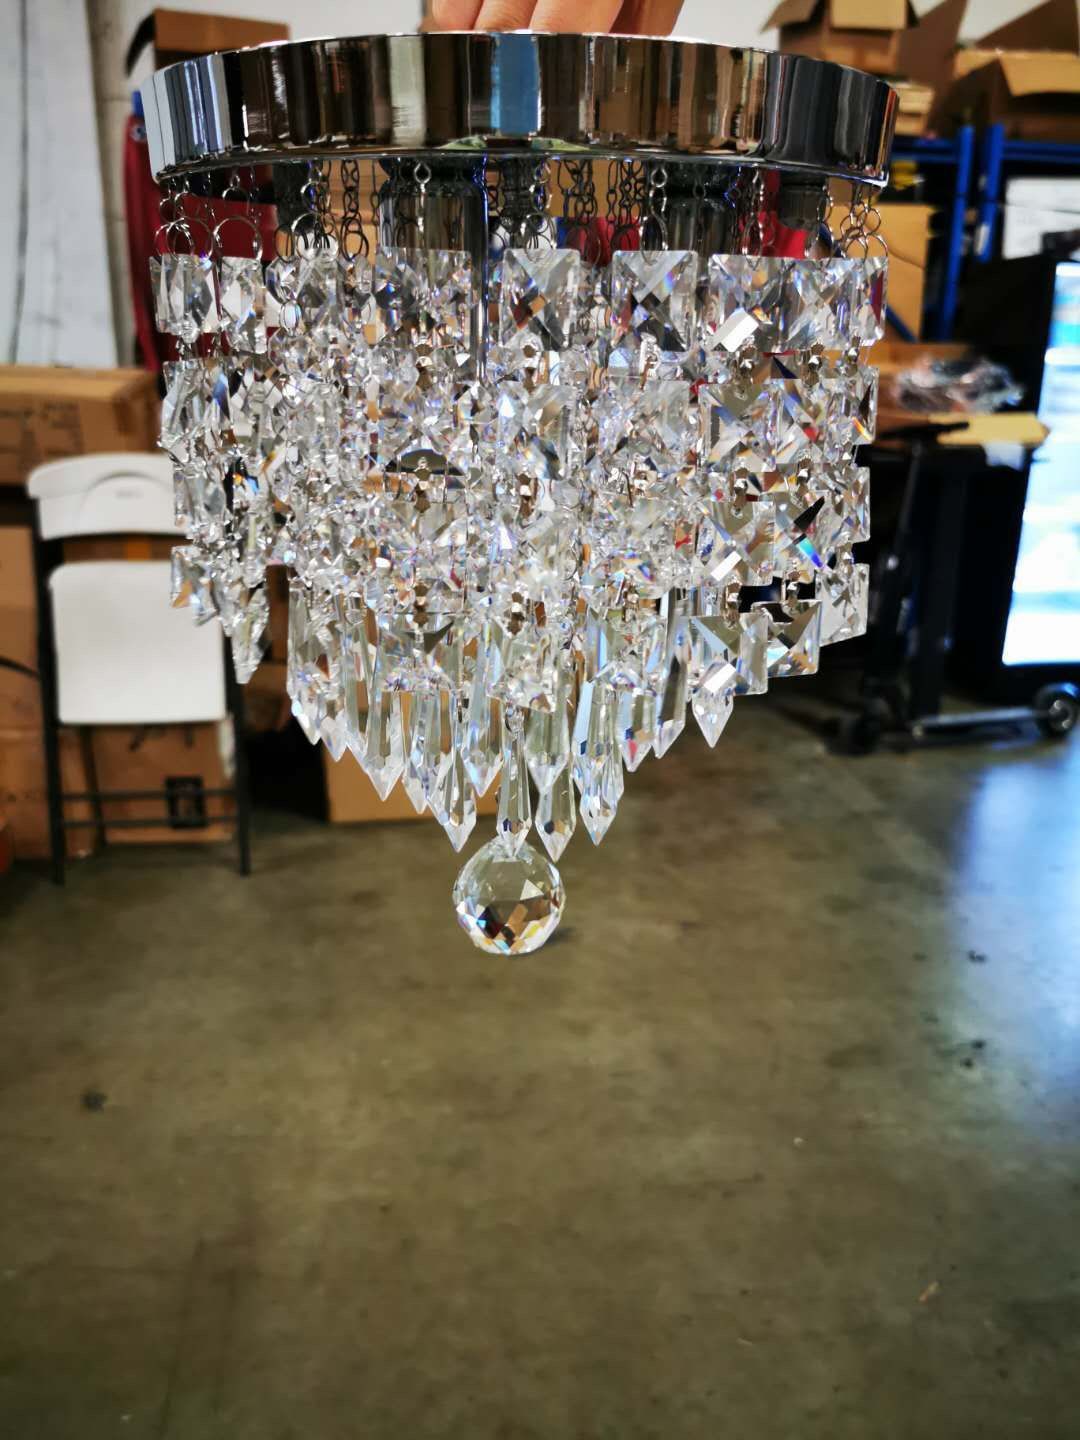 Bling Glass Crystal Chandelier, 3 Lights Modern Round Semi-Flushmount Crystal Ball Lighting Fixture, Chrome Finished, 11 inches High X 8.6 inches Wide